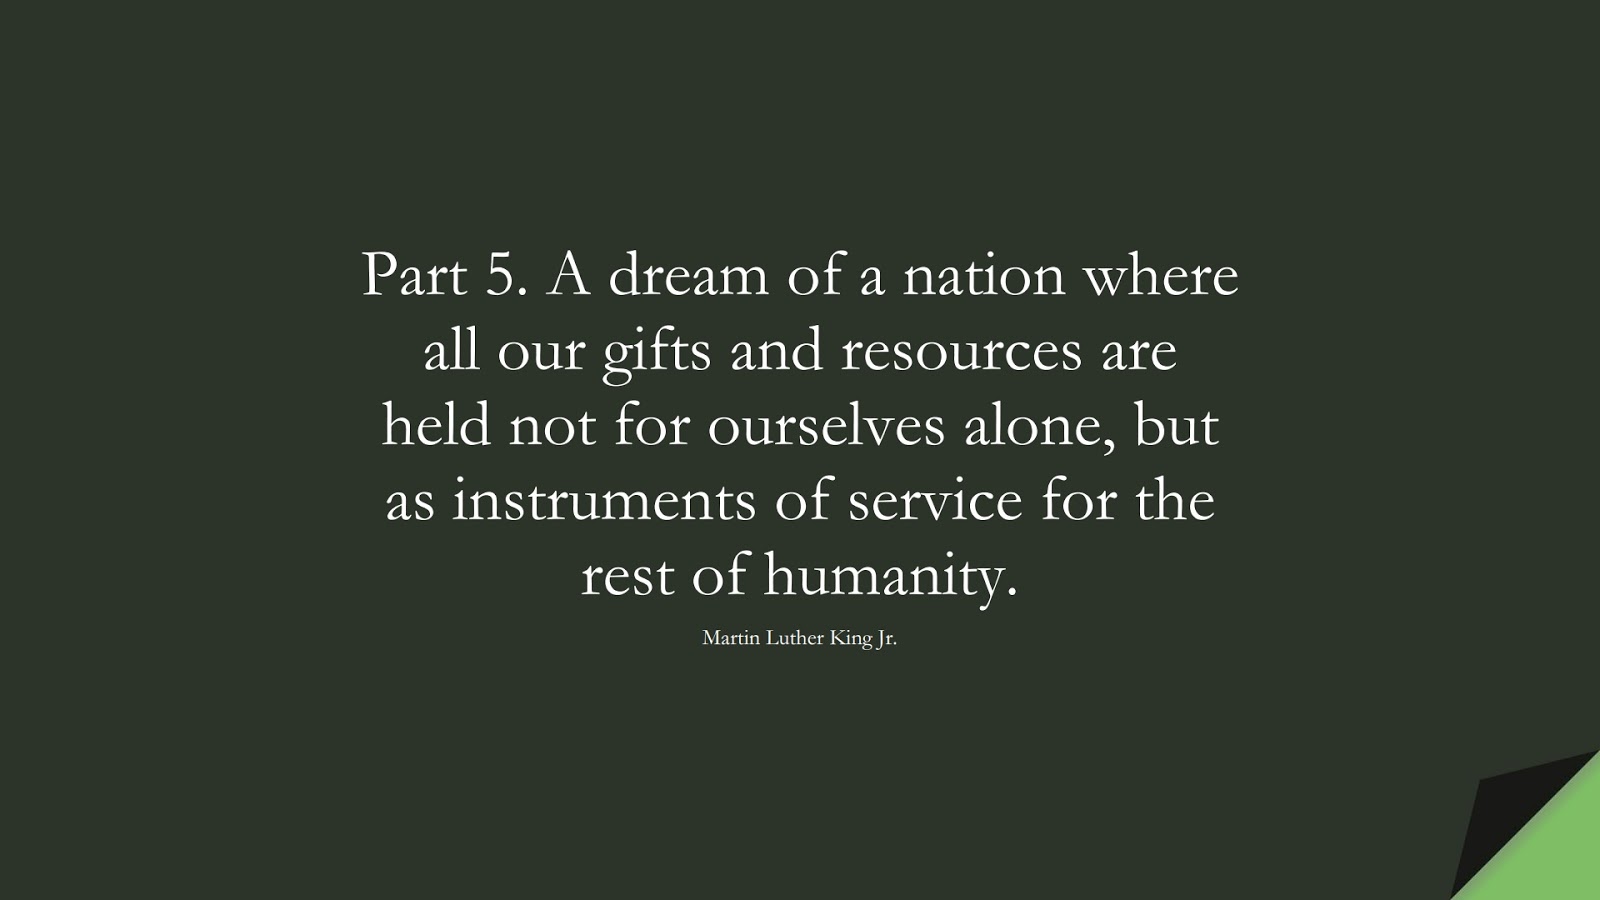 Part 5. A dream of a nation where all our gifts and resources are held not for ourselves alone, but as instruments of service for the rest of humanity. (Martin Luther King Jr.);  #HumanityQuotes